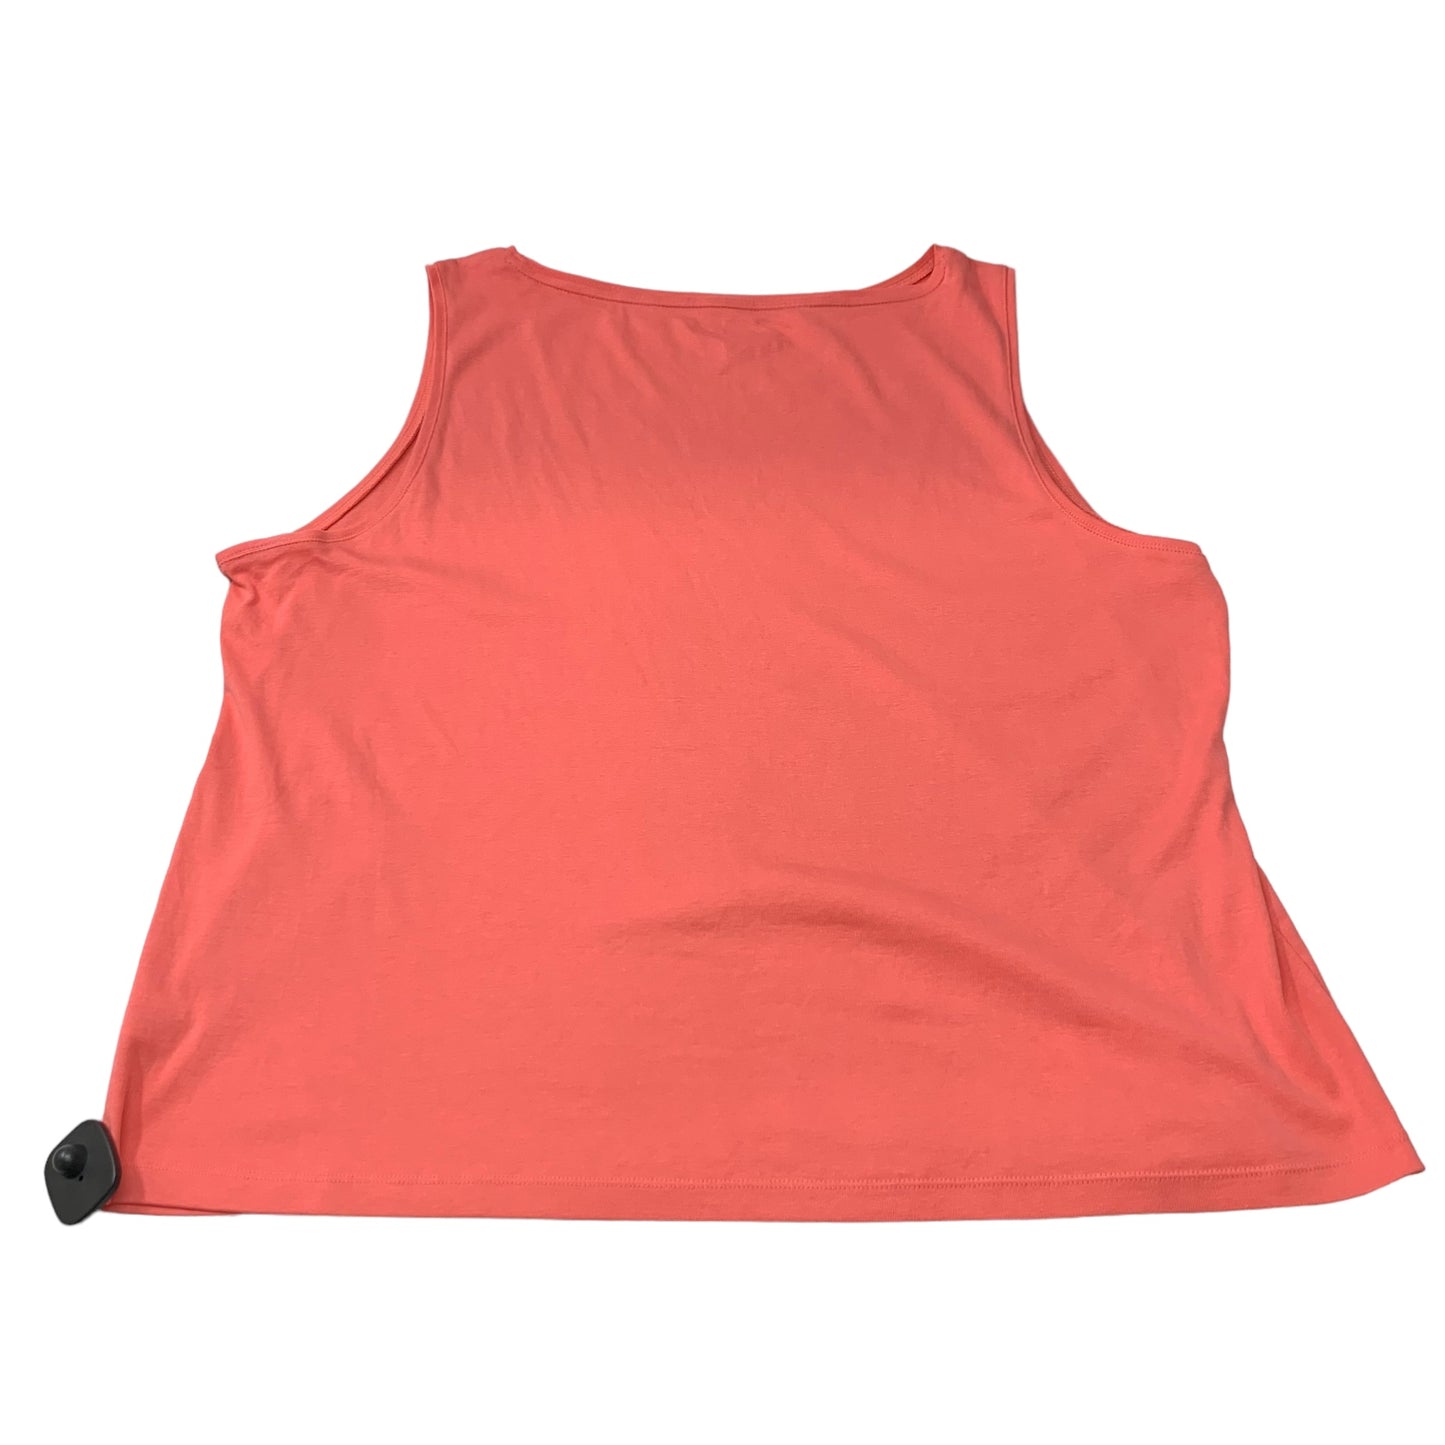 Top Sleeveless By Talbots  Size: 3x